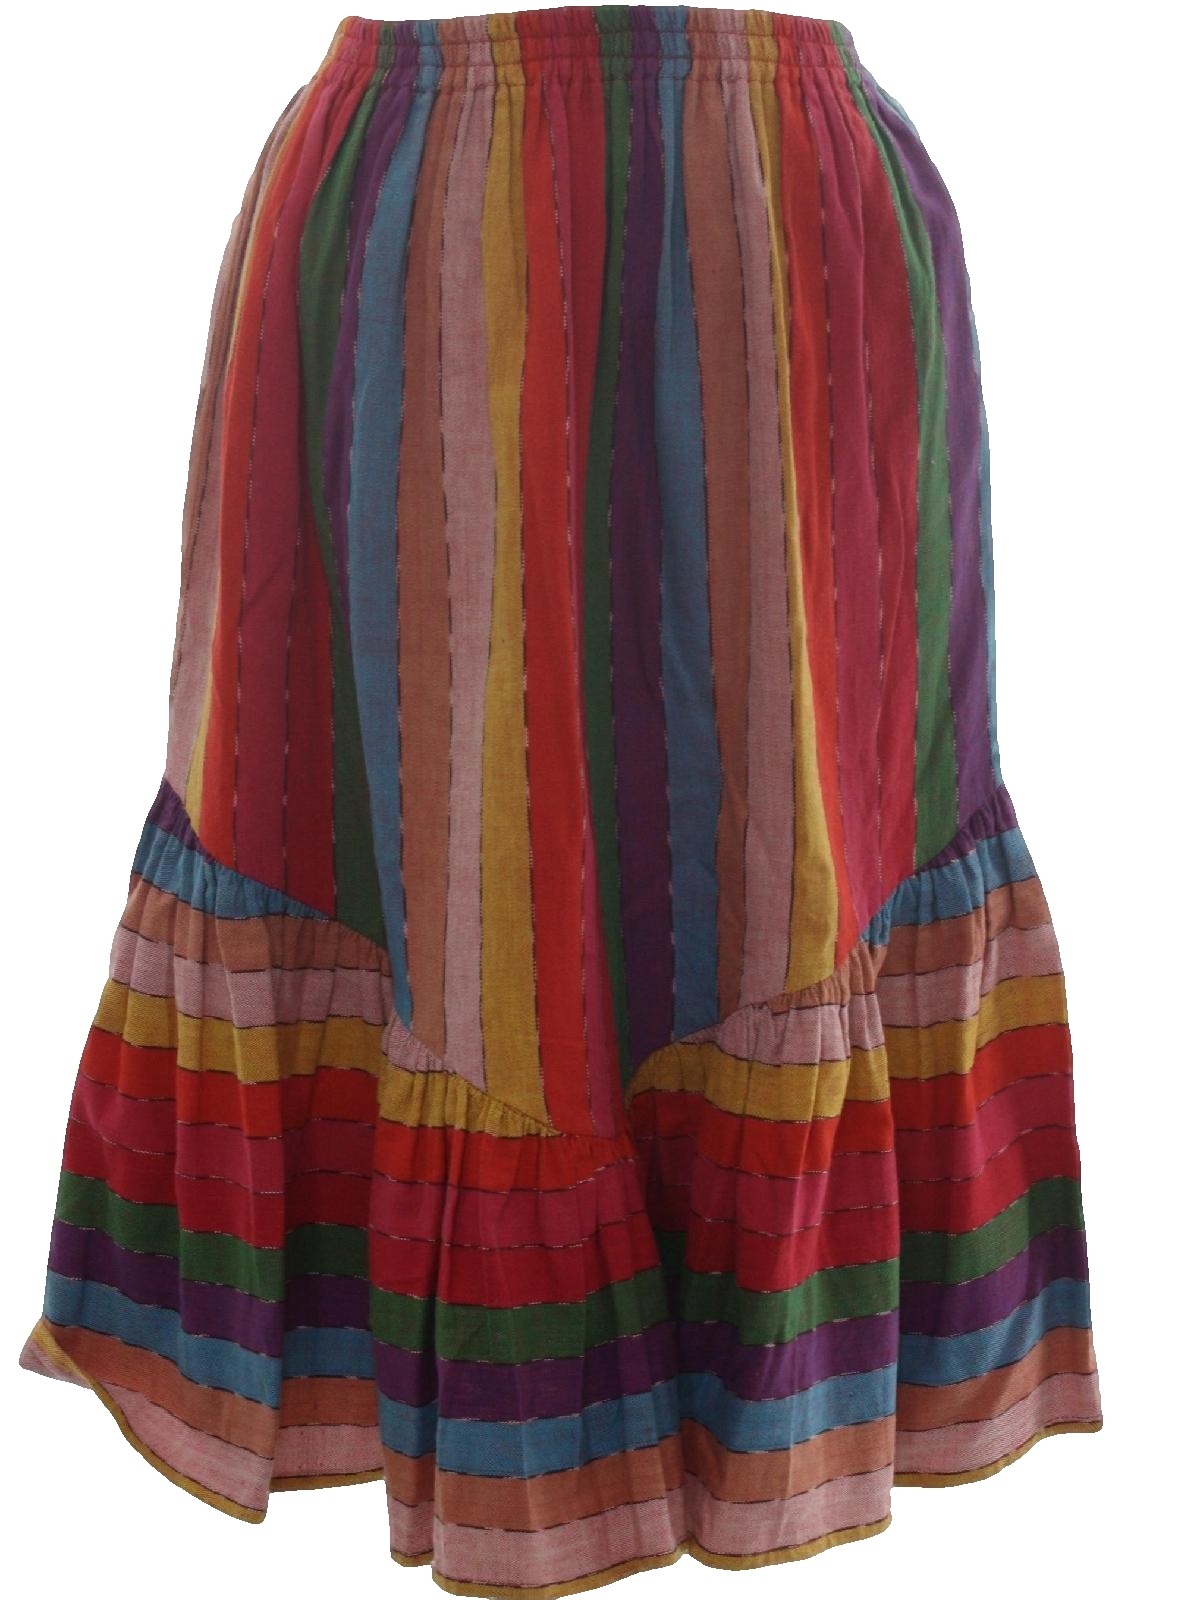 Retro 1980s Hippie Skirt: 80s -Care Label Only- Womens rainbow striped ...